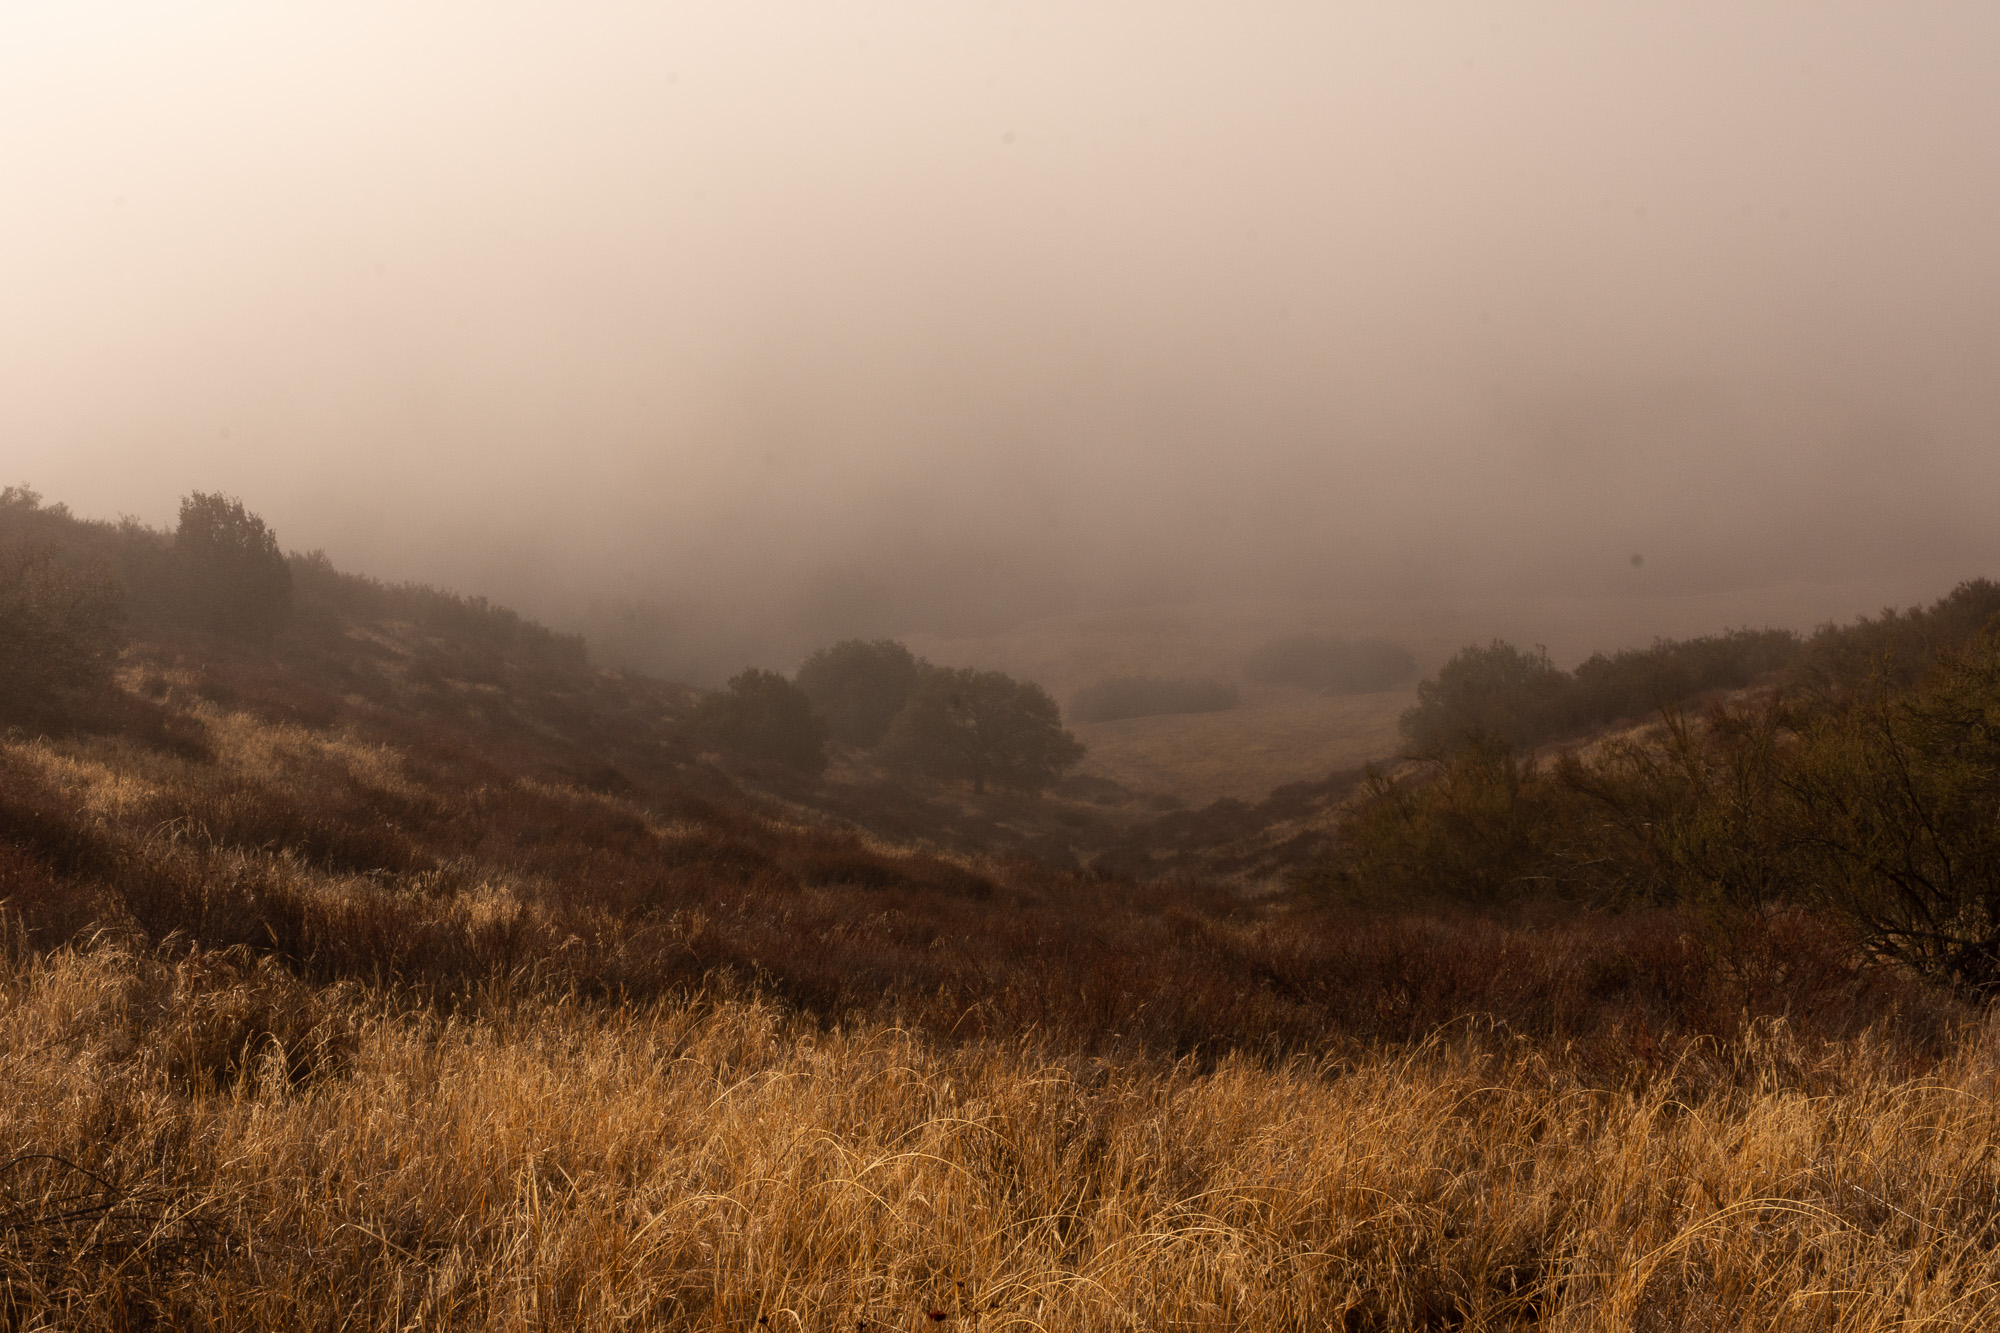 This shot was taken at 9:14 AM, just as the fog began its retreat.